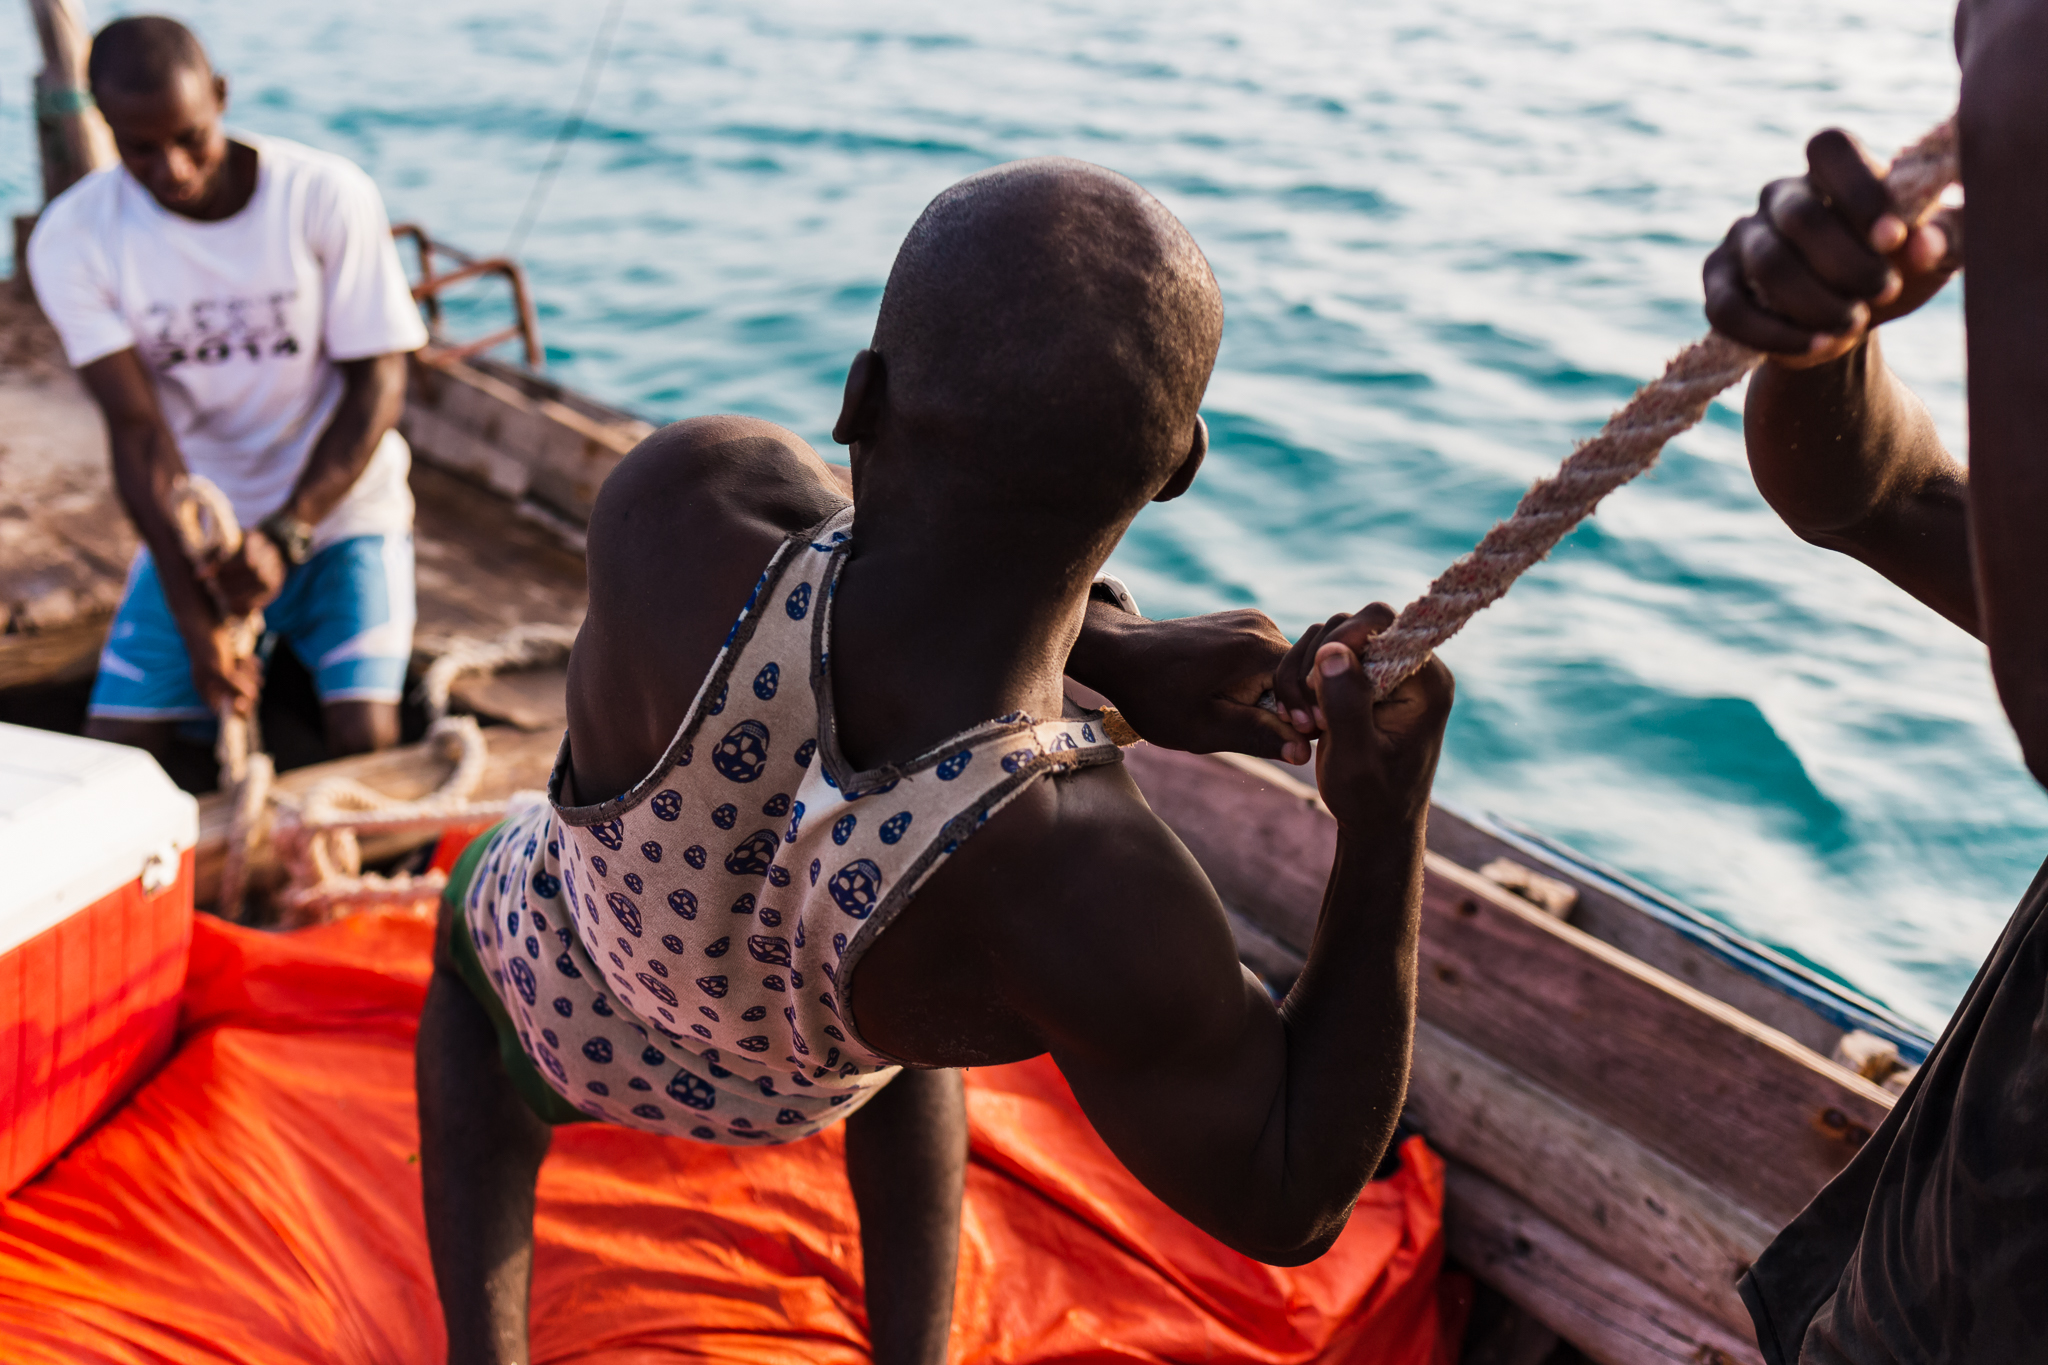 It takes all four men to keep the dhow sailing. Their craft is made of wood, iron, rope and canvas. The men are intimately familiar with dhow, like an old comfortable pair of shoes.